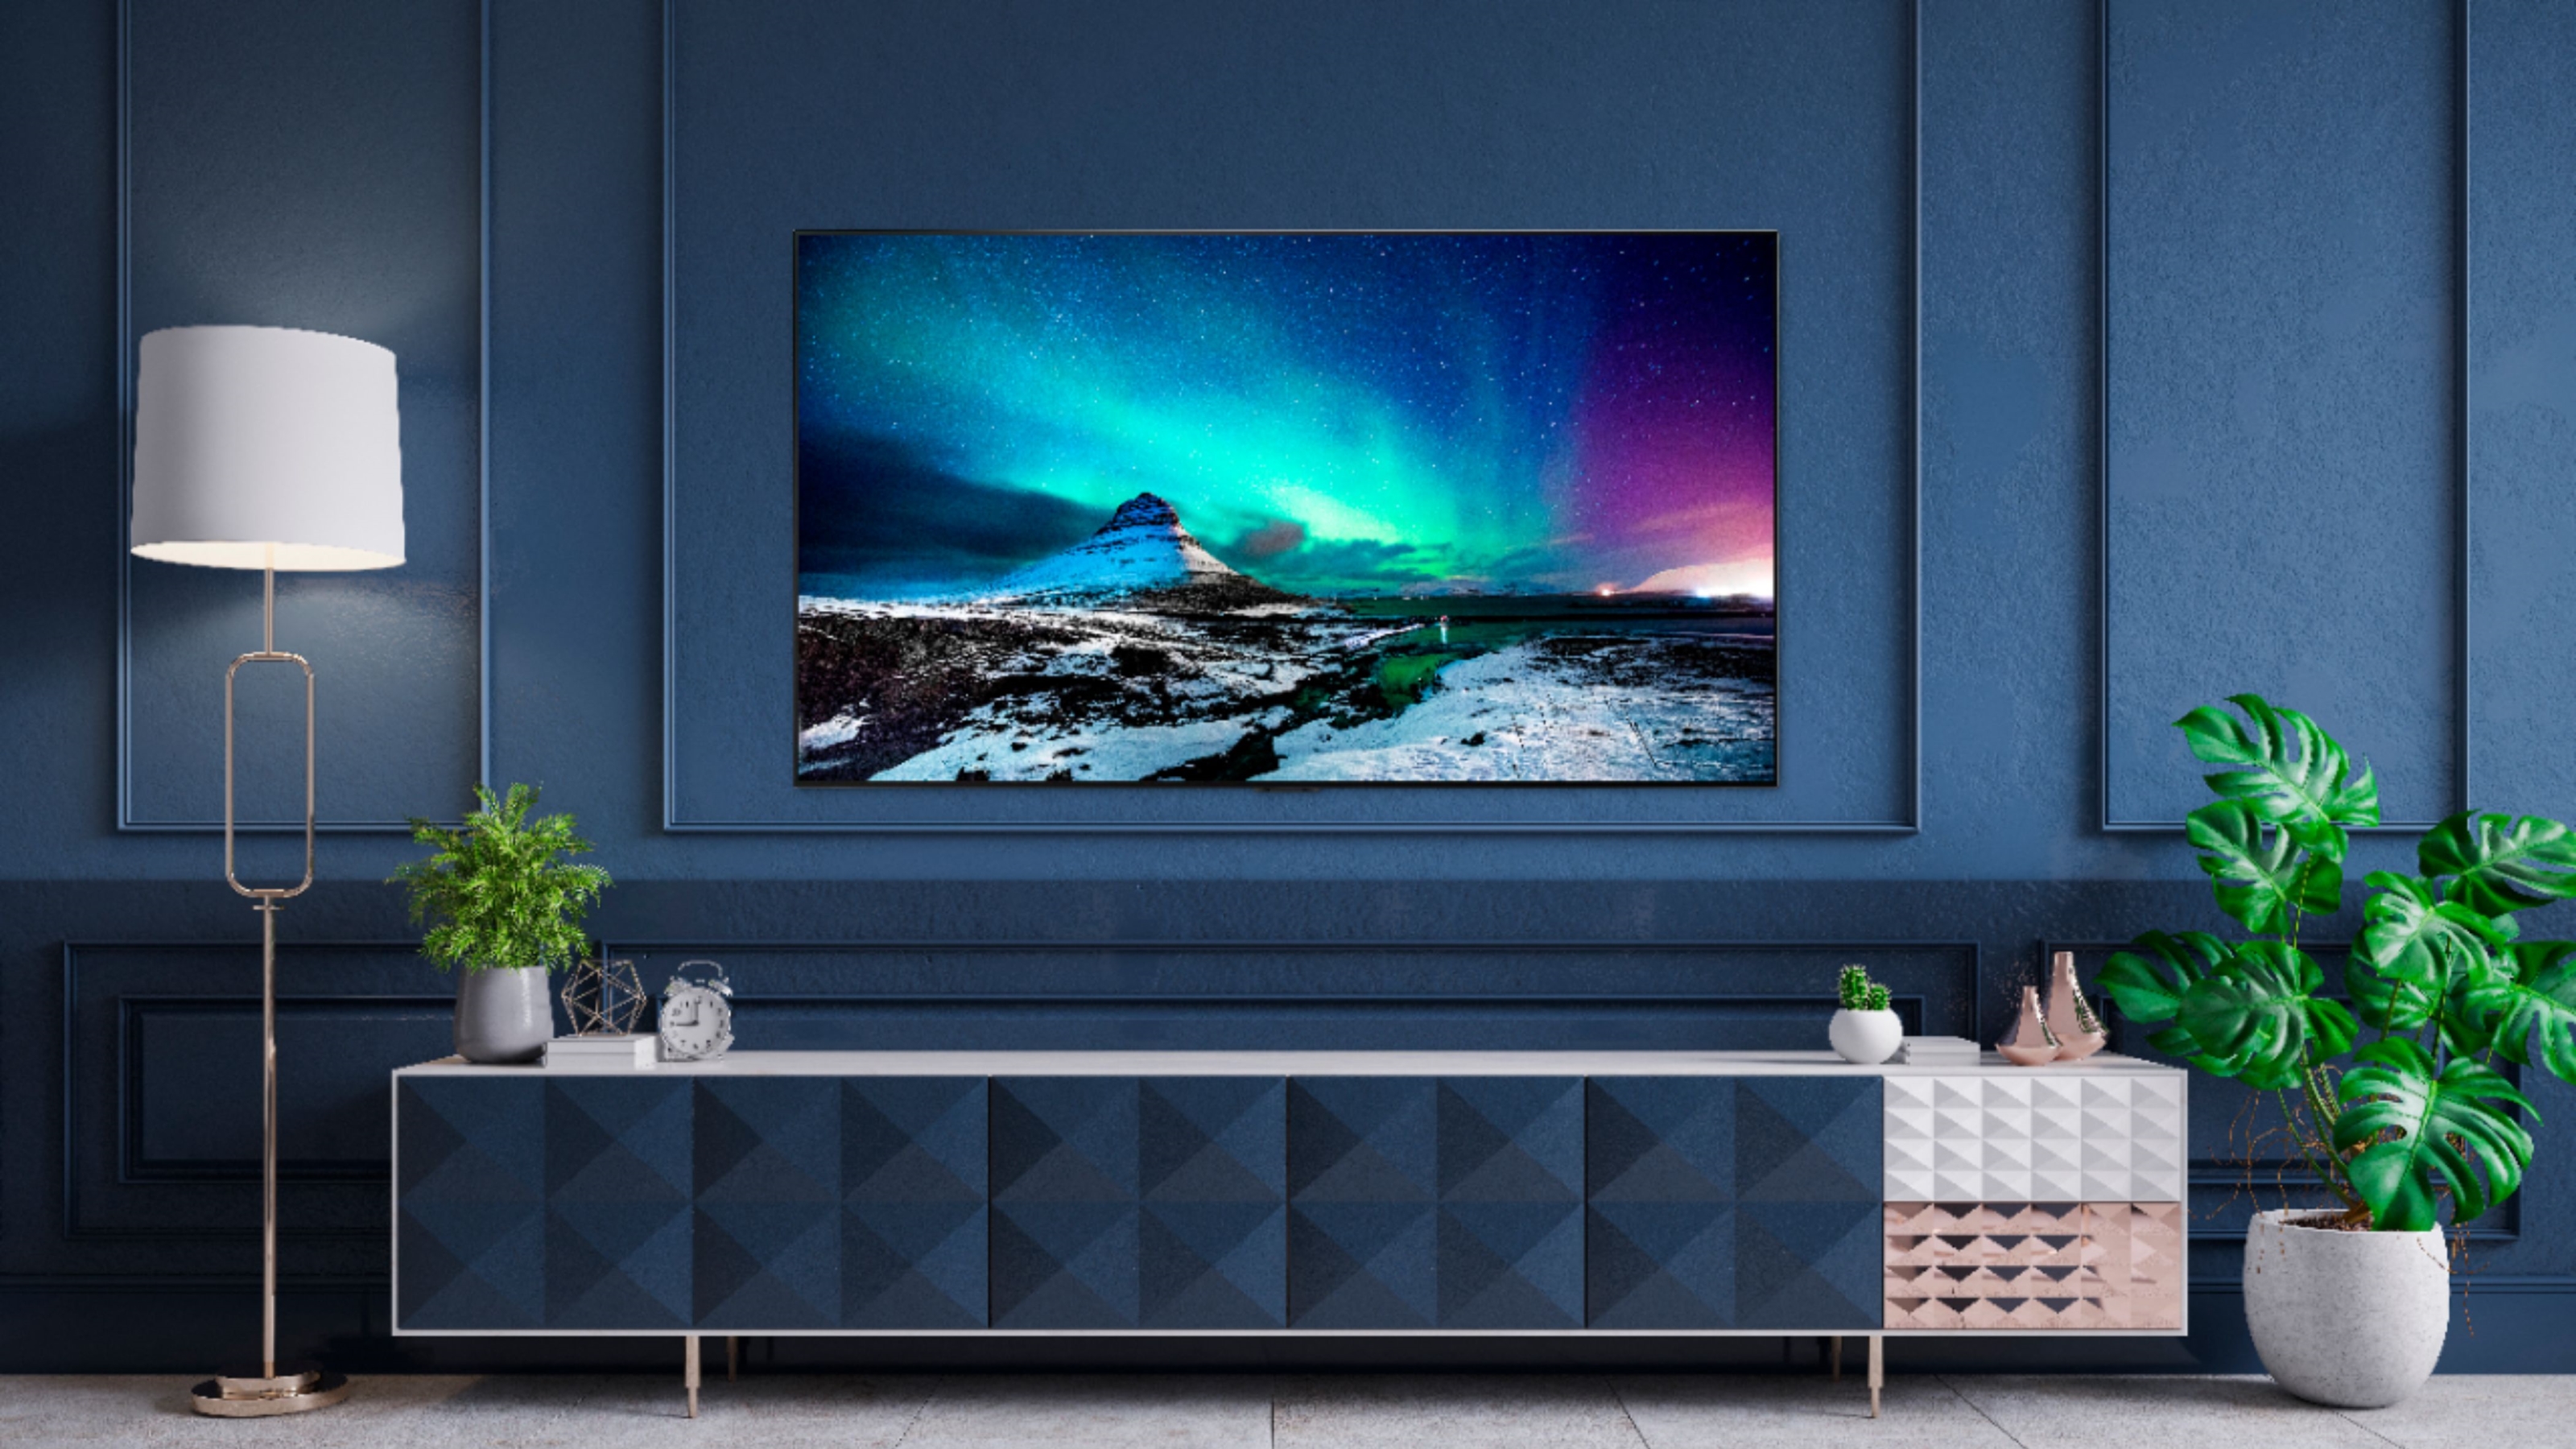 front Accustomed to Far away Samsung vs LG TV: which TV brand is the best in 2023? | Livingetc